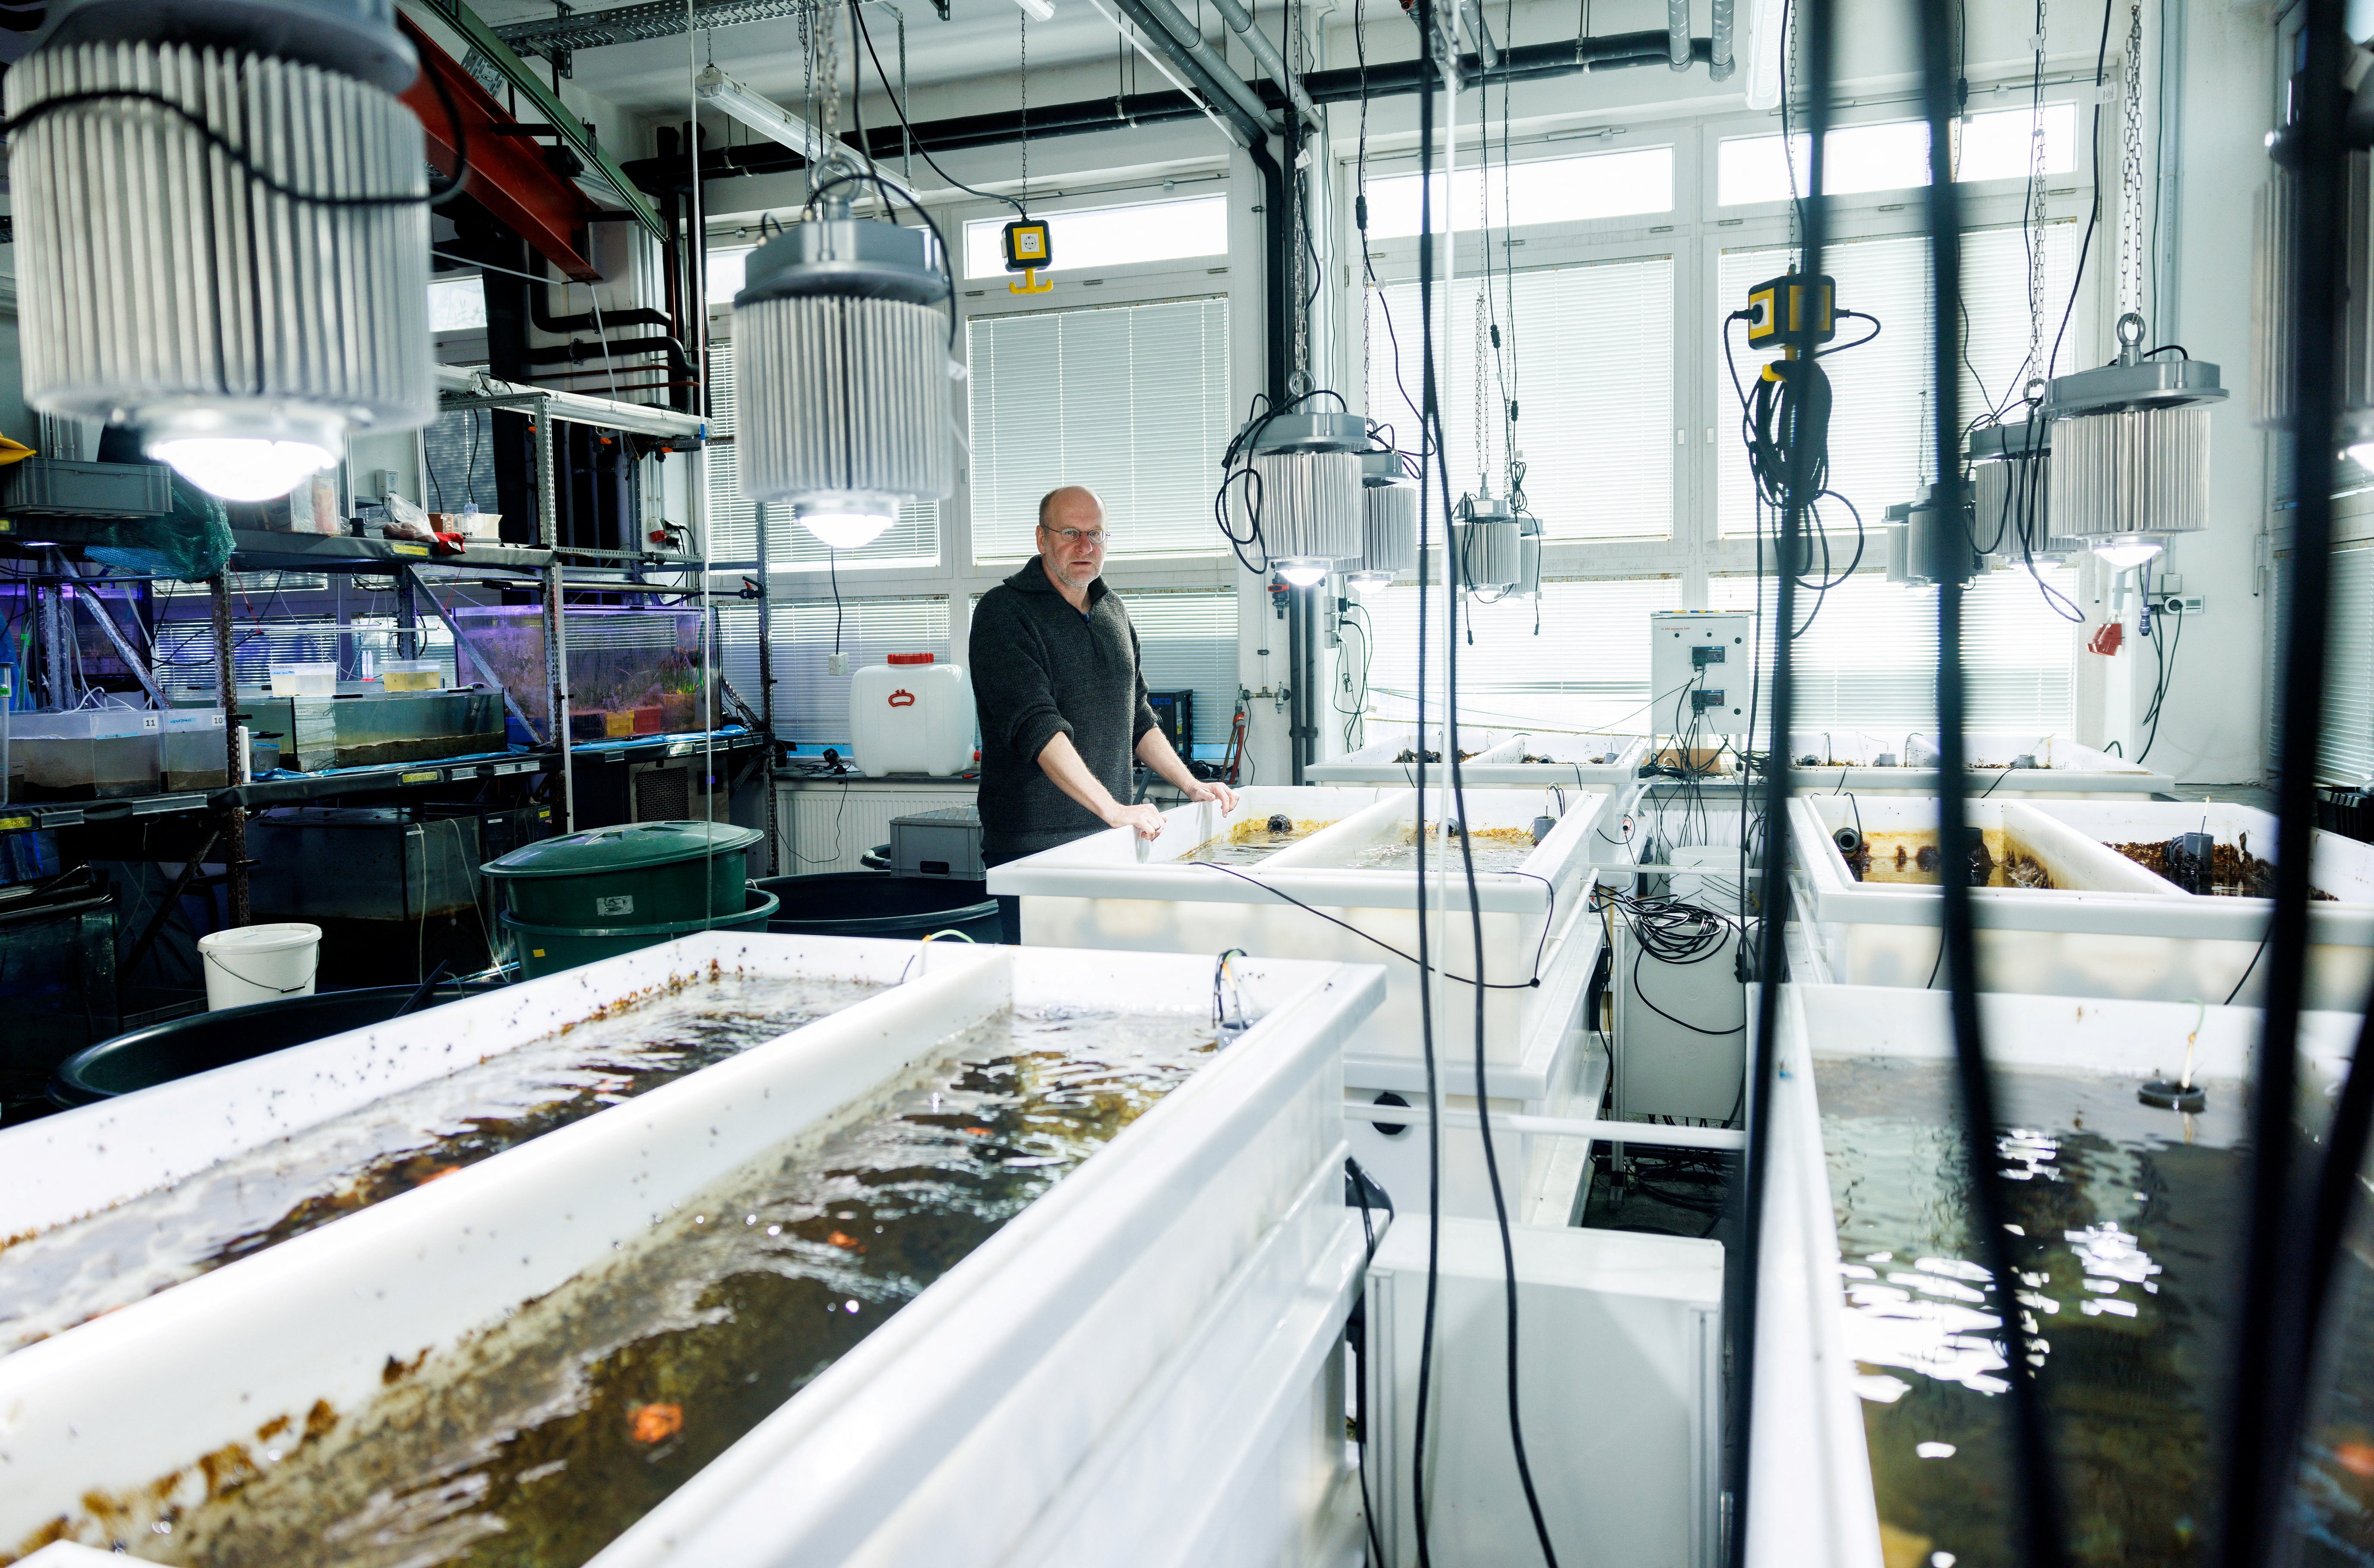 Thorsten Reusch, a marine scientist for Geomar, next to tanks containing seagrass at the lab of the SeaStore Seagrass Restoration Project at the Geomar Helmholtz Centre for Ocean Research in Kiel, Germany, 19 April